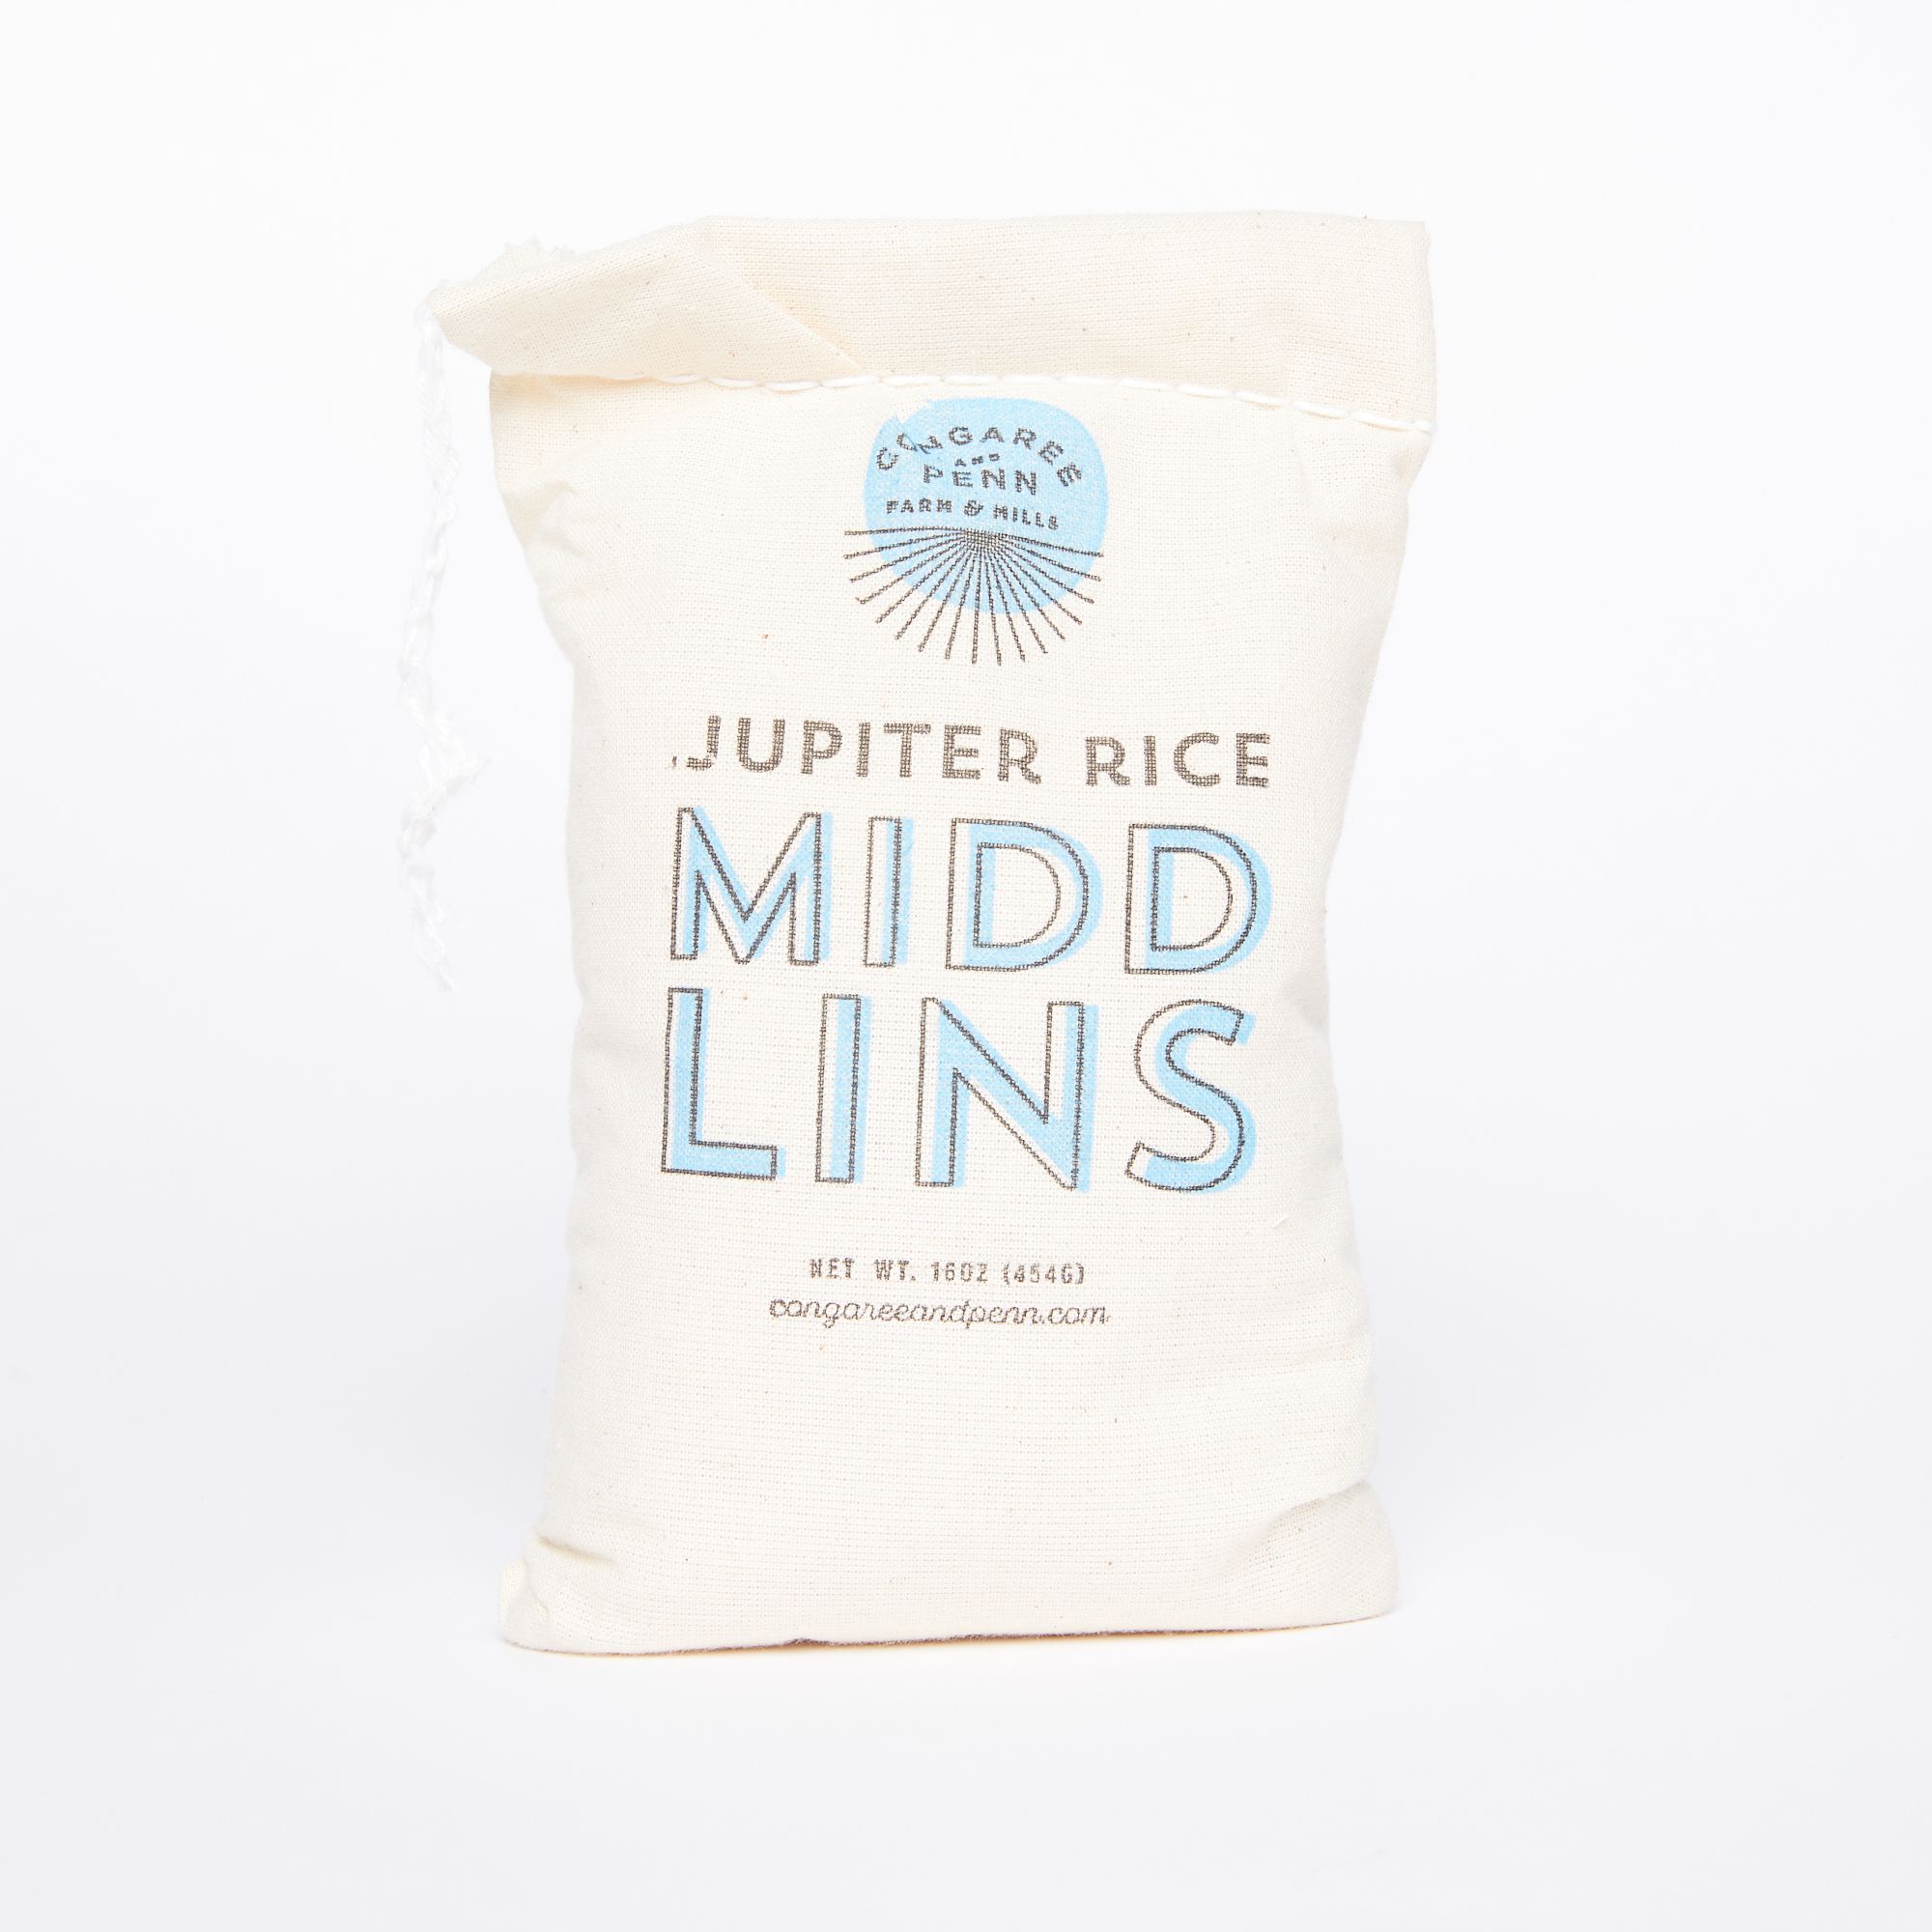 A cream colored sack that reads "Jupiter Rice Middlins" in brown and blue all caps